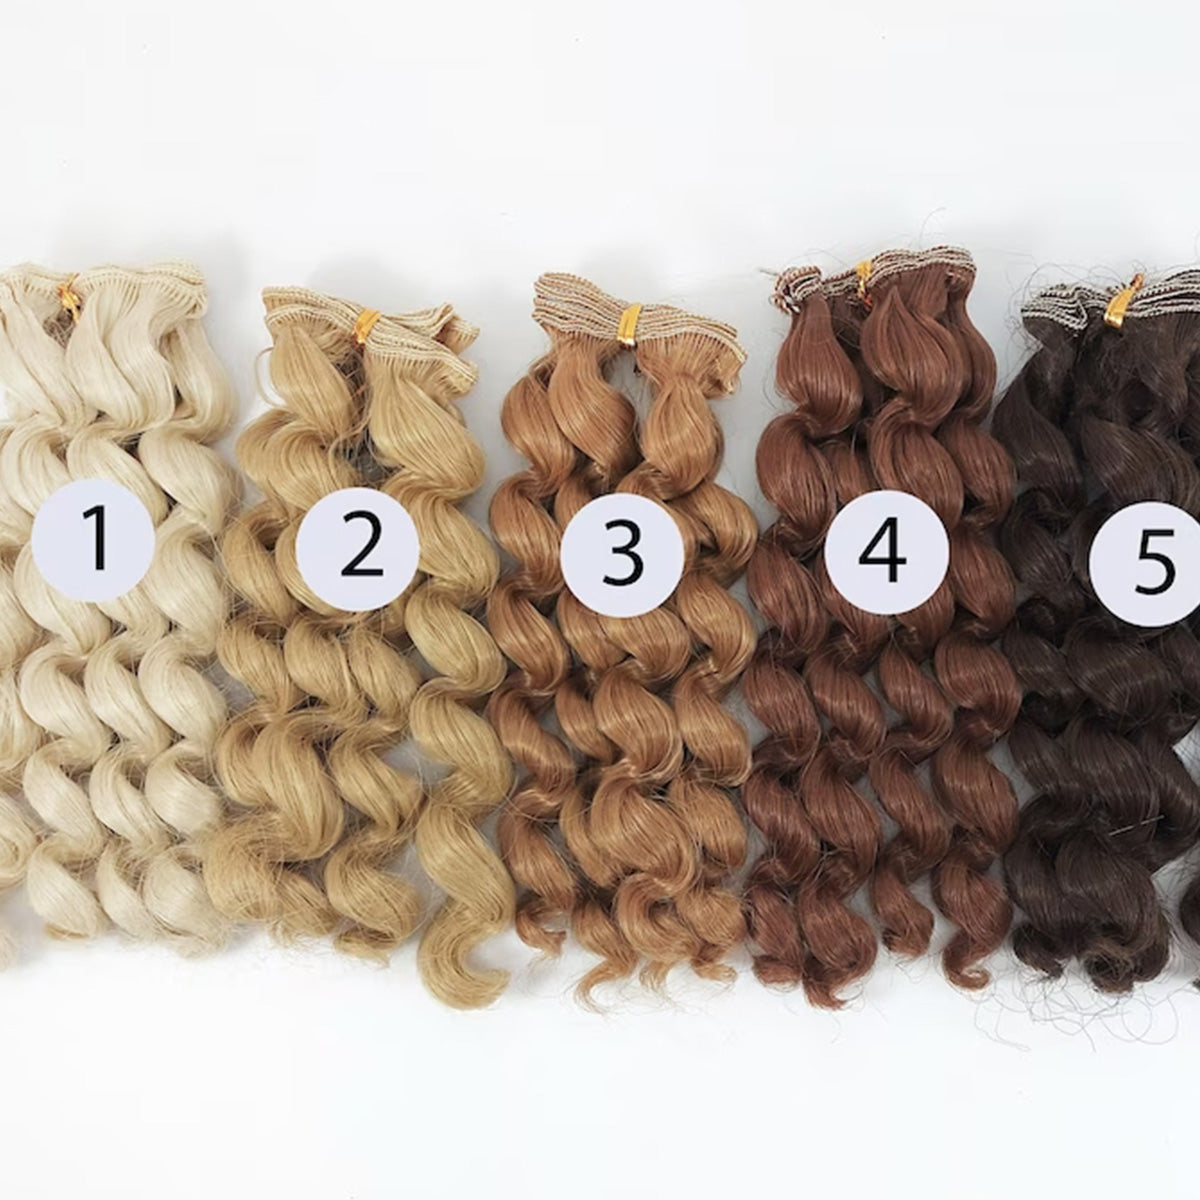 Wholesale Wig Packages